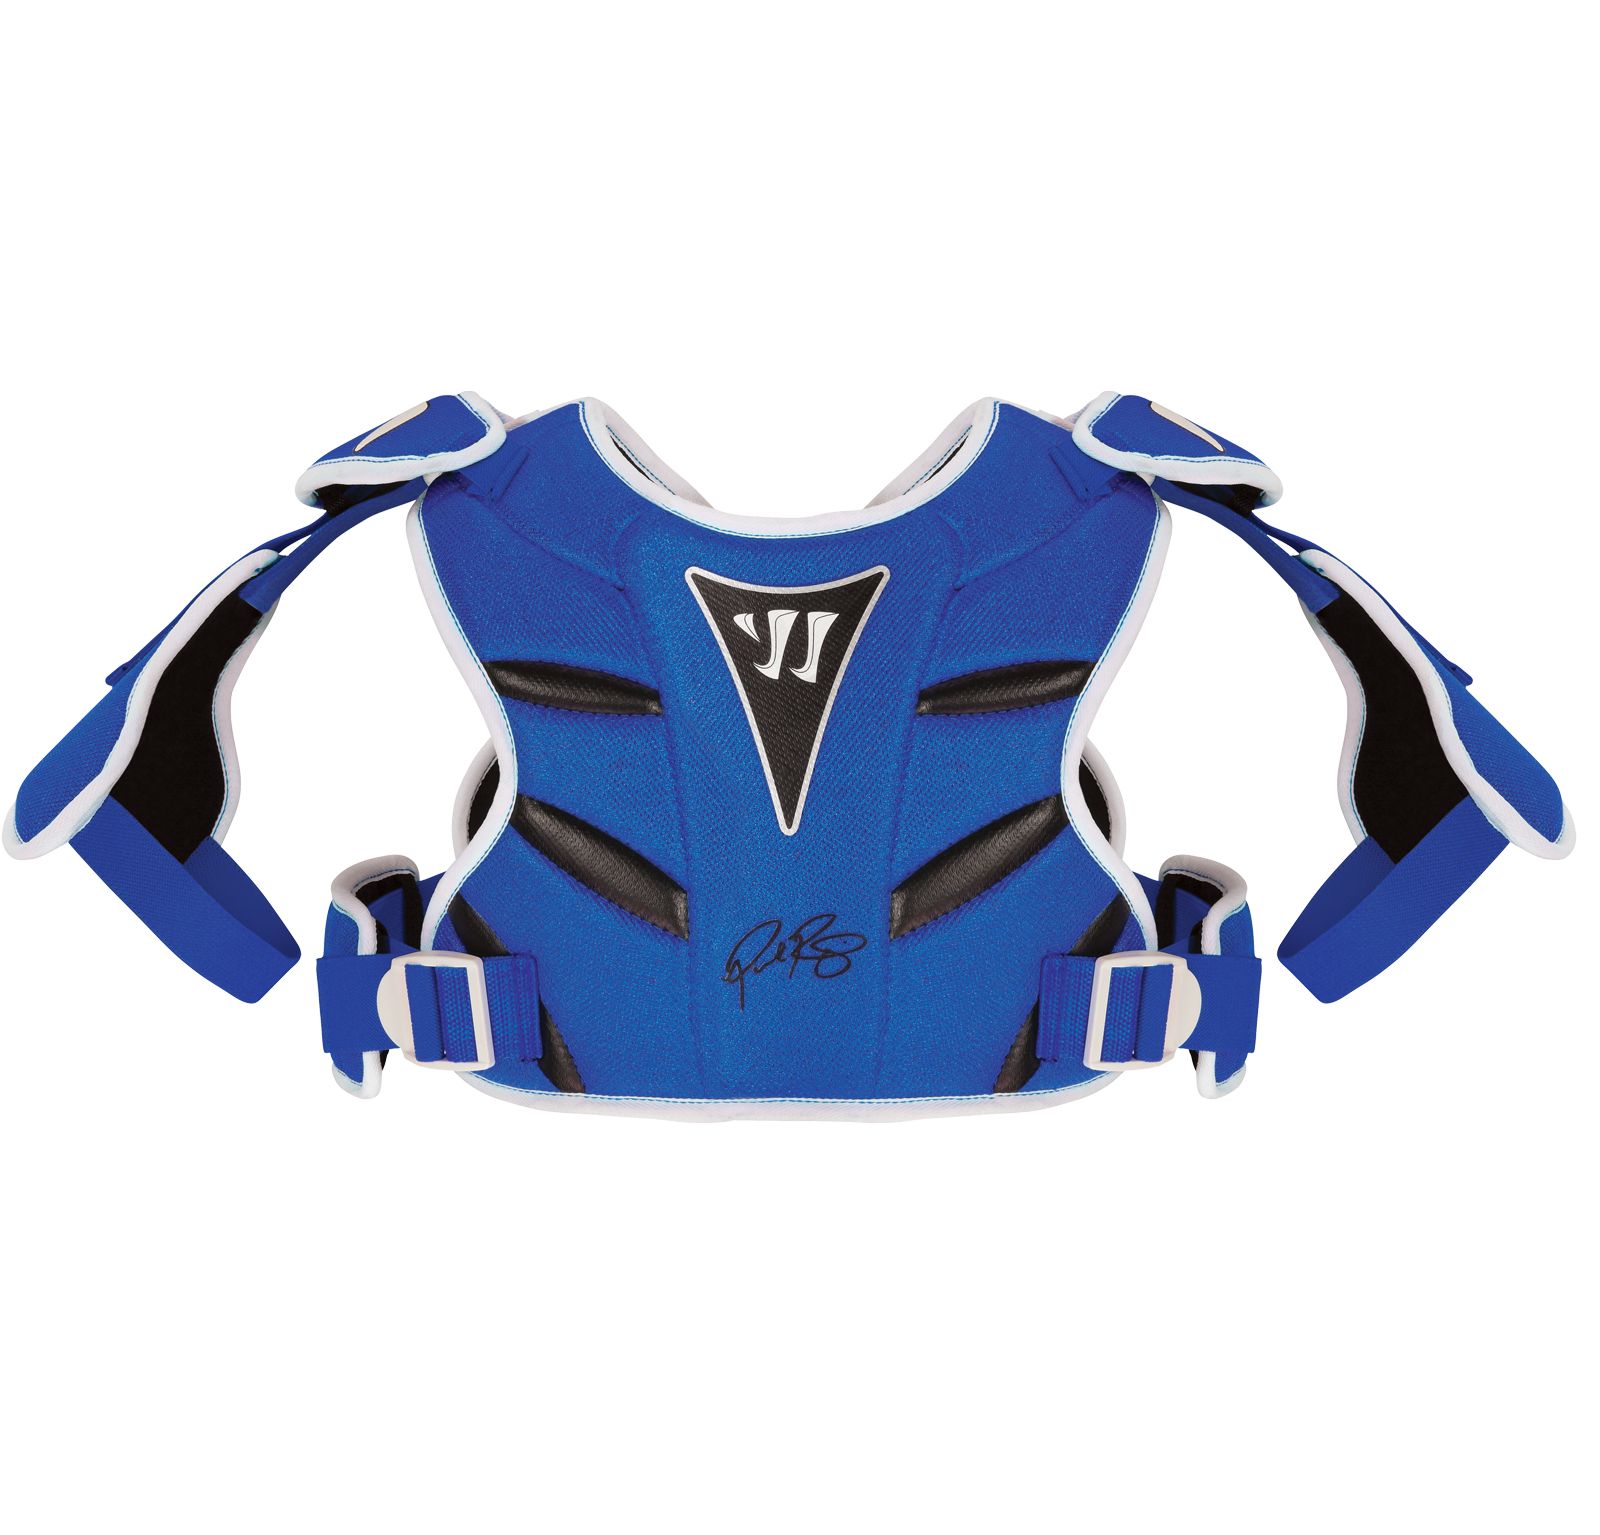 Rabil Next Shoulder Pad, Royal Blue with White image number 1